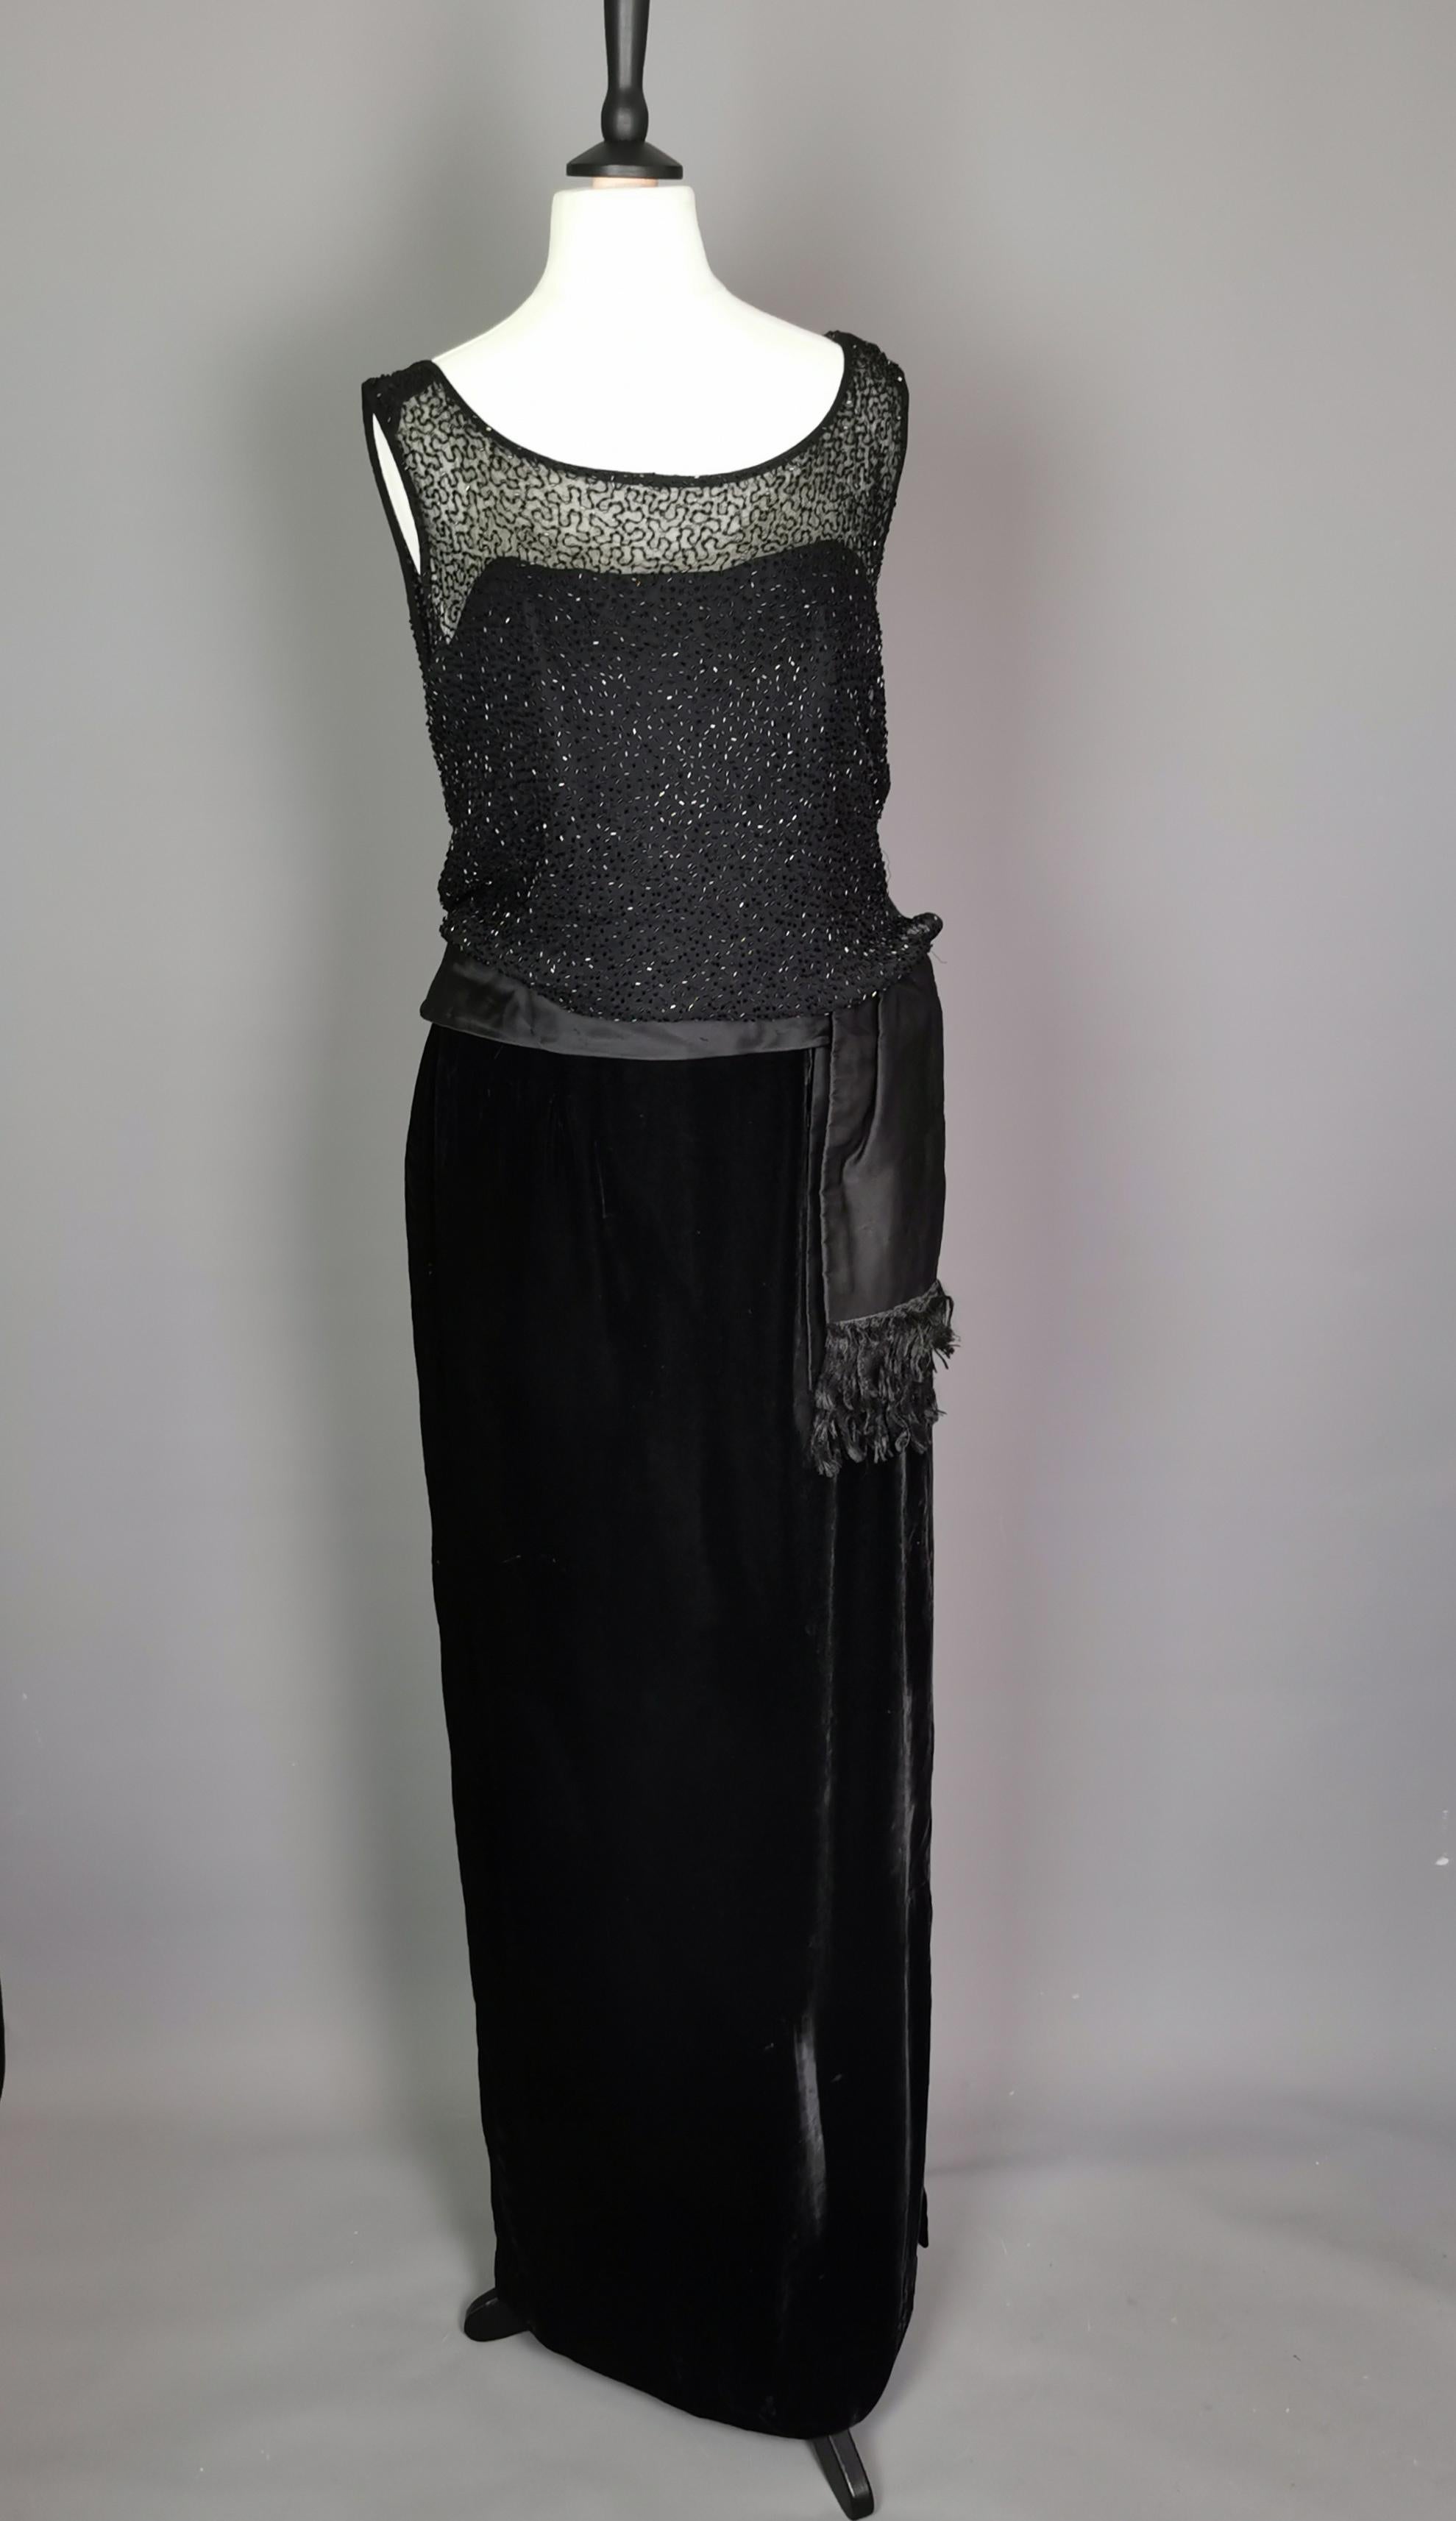 A gorgeous vintage c1970s cocktail dress by Jean Allen

It is a long ankle length maxi dress with a figure hugging silhouette, the dress comprises of multiple layers and is very heavy and well made.

It has a black satin underdress with a bustier